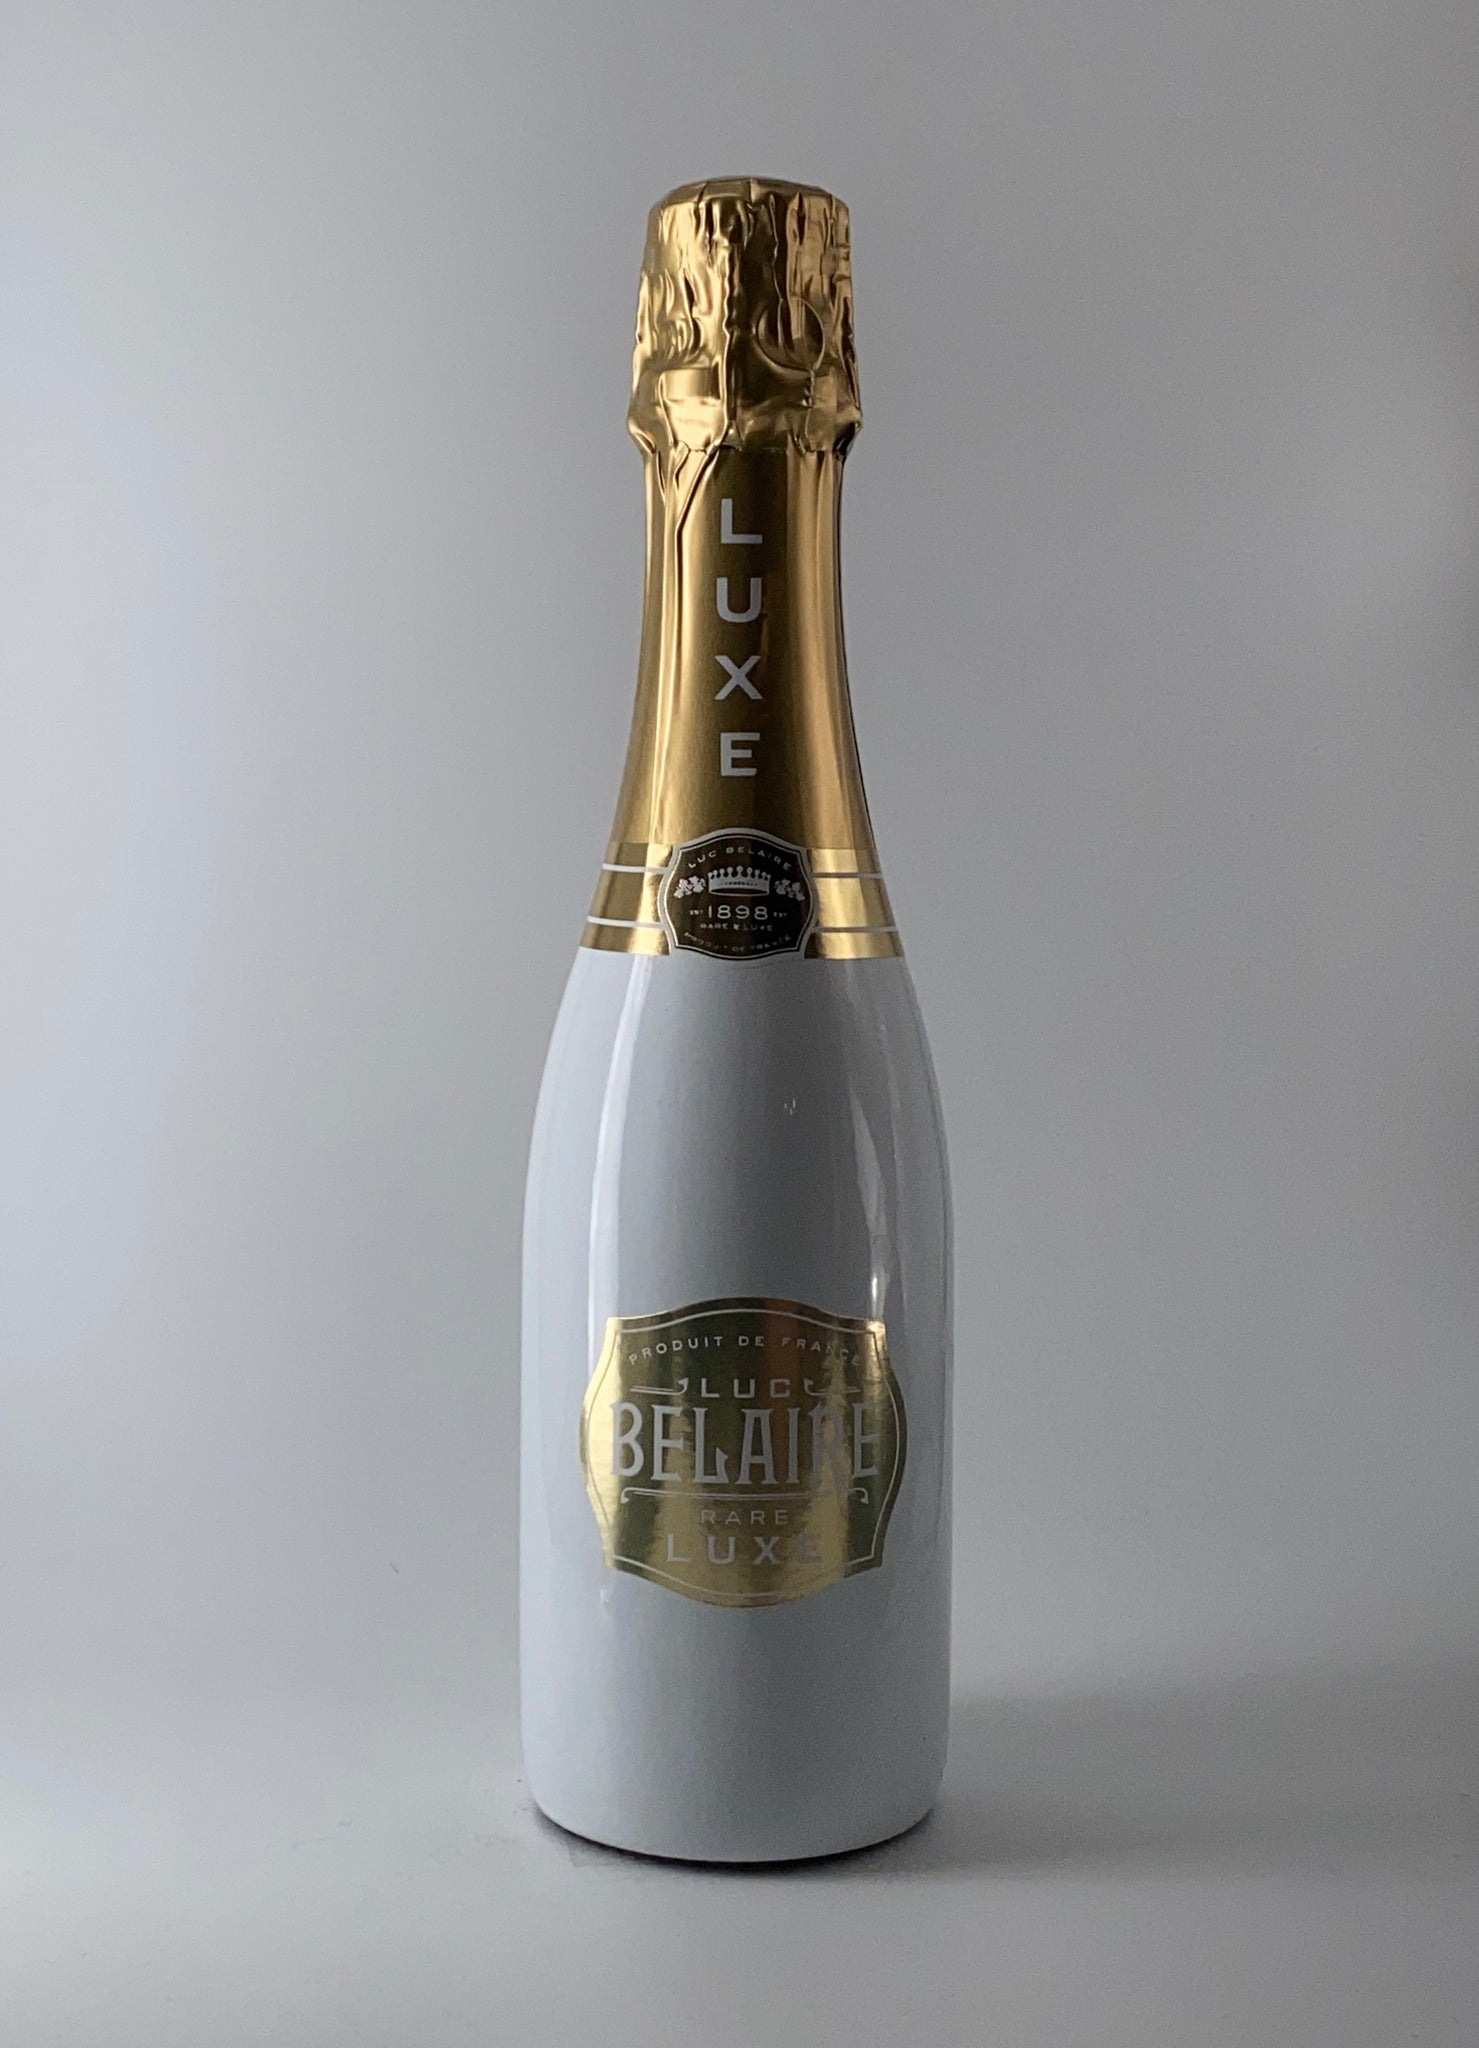 Champagne, Luc Belaire Brut Gold